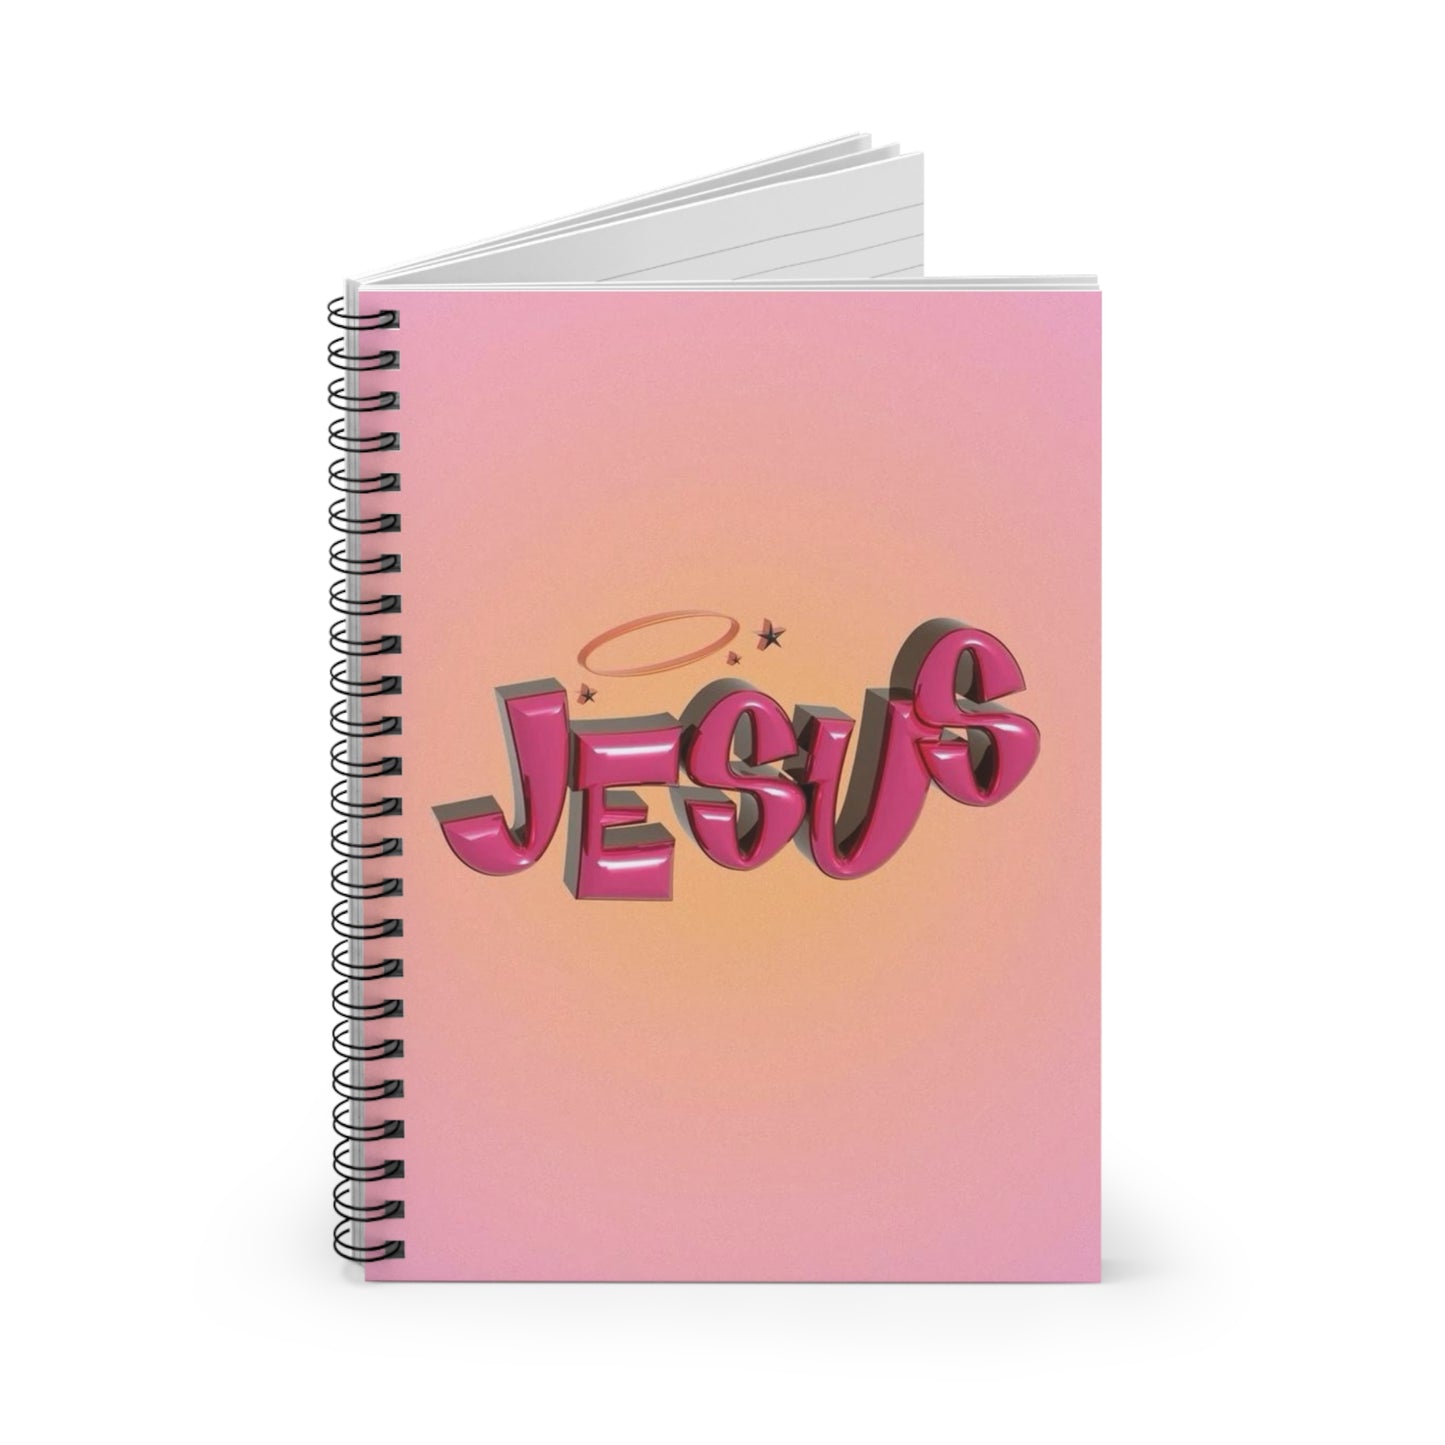 Jesus Bubble Text Spiral Notebook - Ruled Line